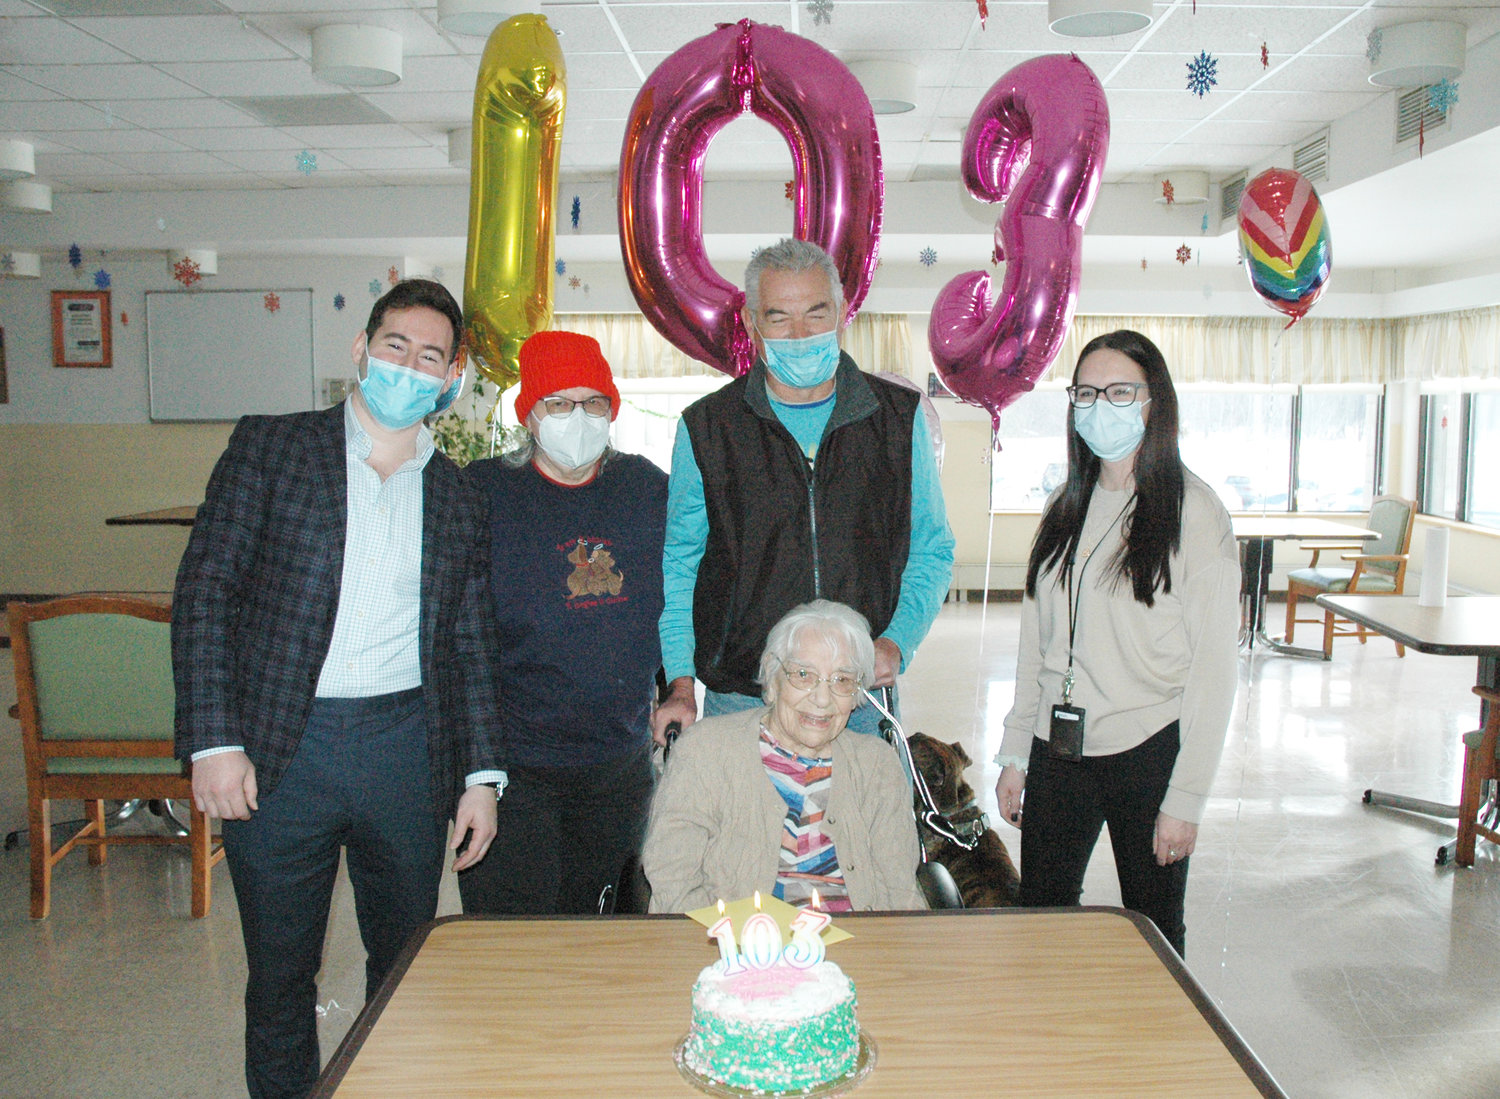 From left to right, Sunset Lake Care Center’s Director of Marketing and Admissions, Elliot Weiss, daughter Caroline Kurtz, son Albert Stenson Jr., birthday celebrant Marie Stenson, and Sunset Lake Care Center’s Activity Director Miranda Page.